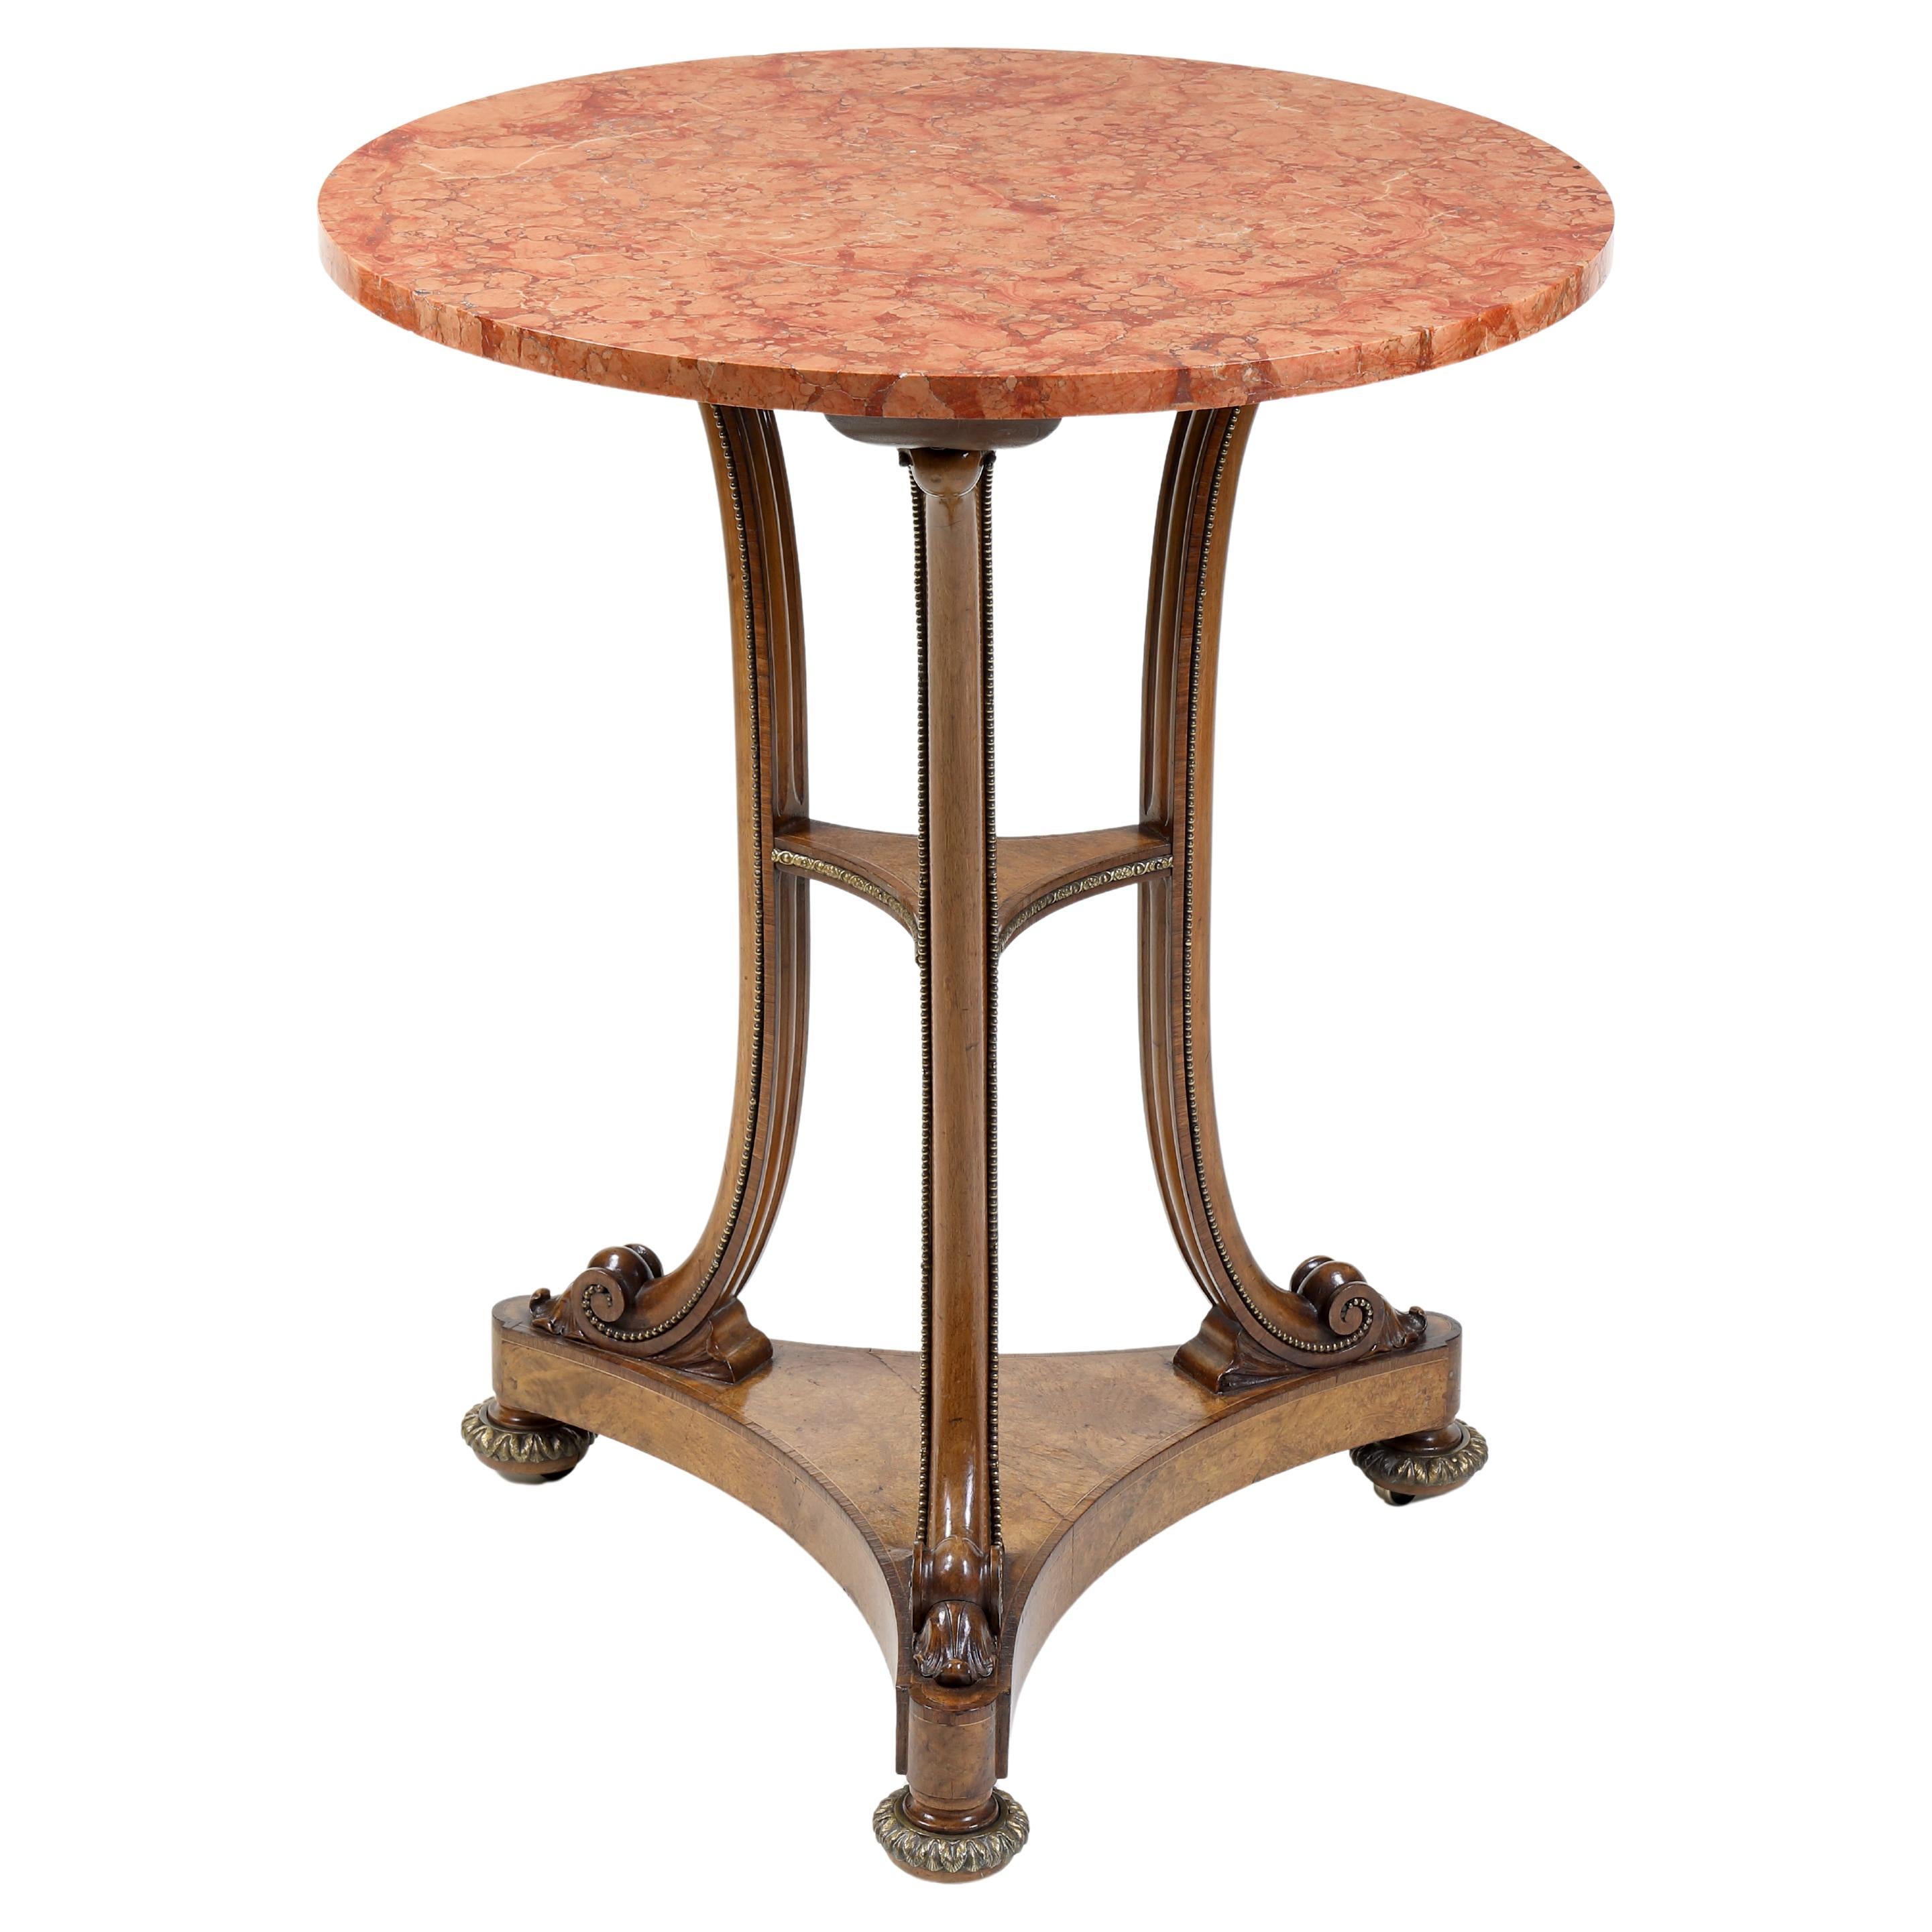 Circular Burr Walnut Occasional Table with Marble Top